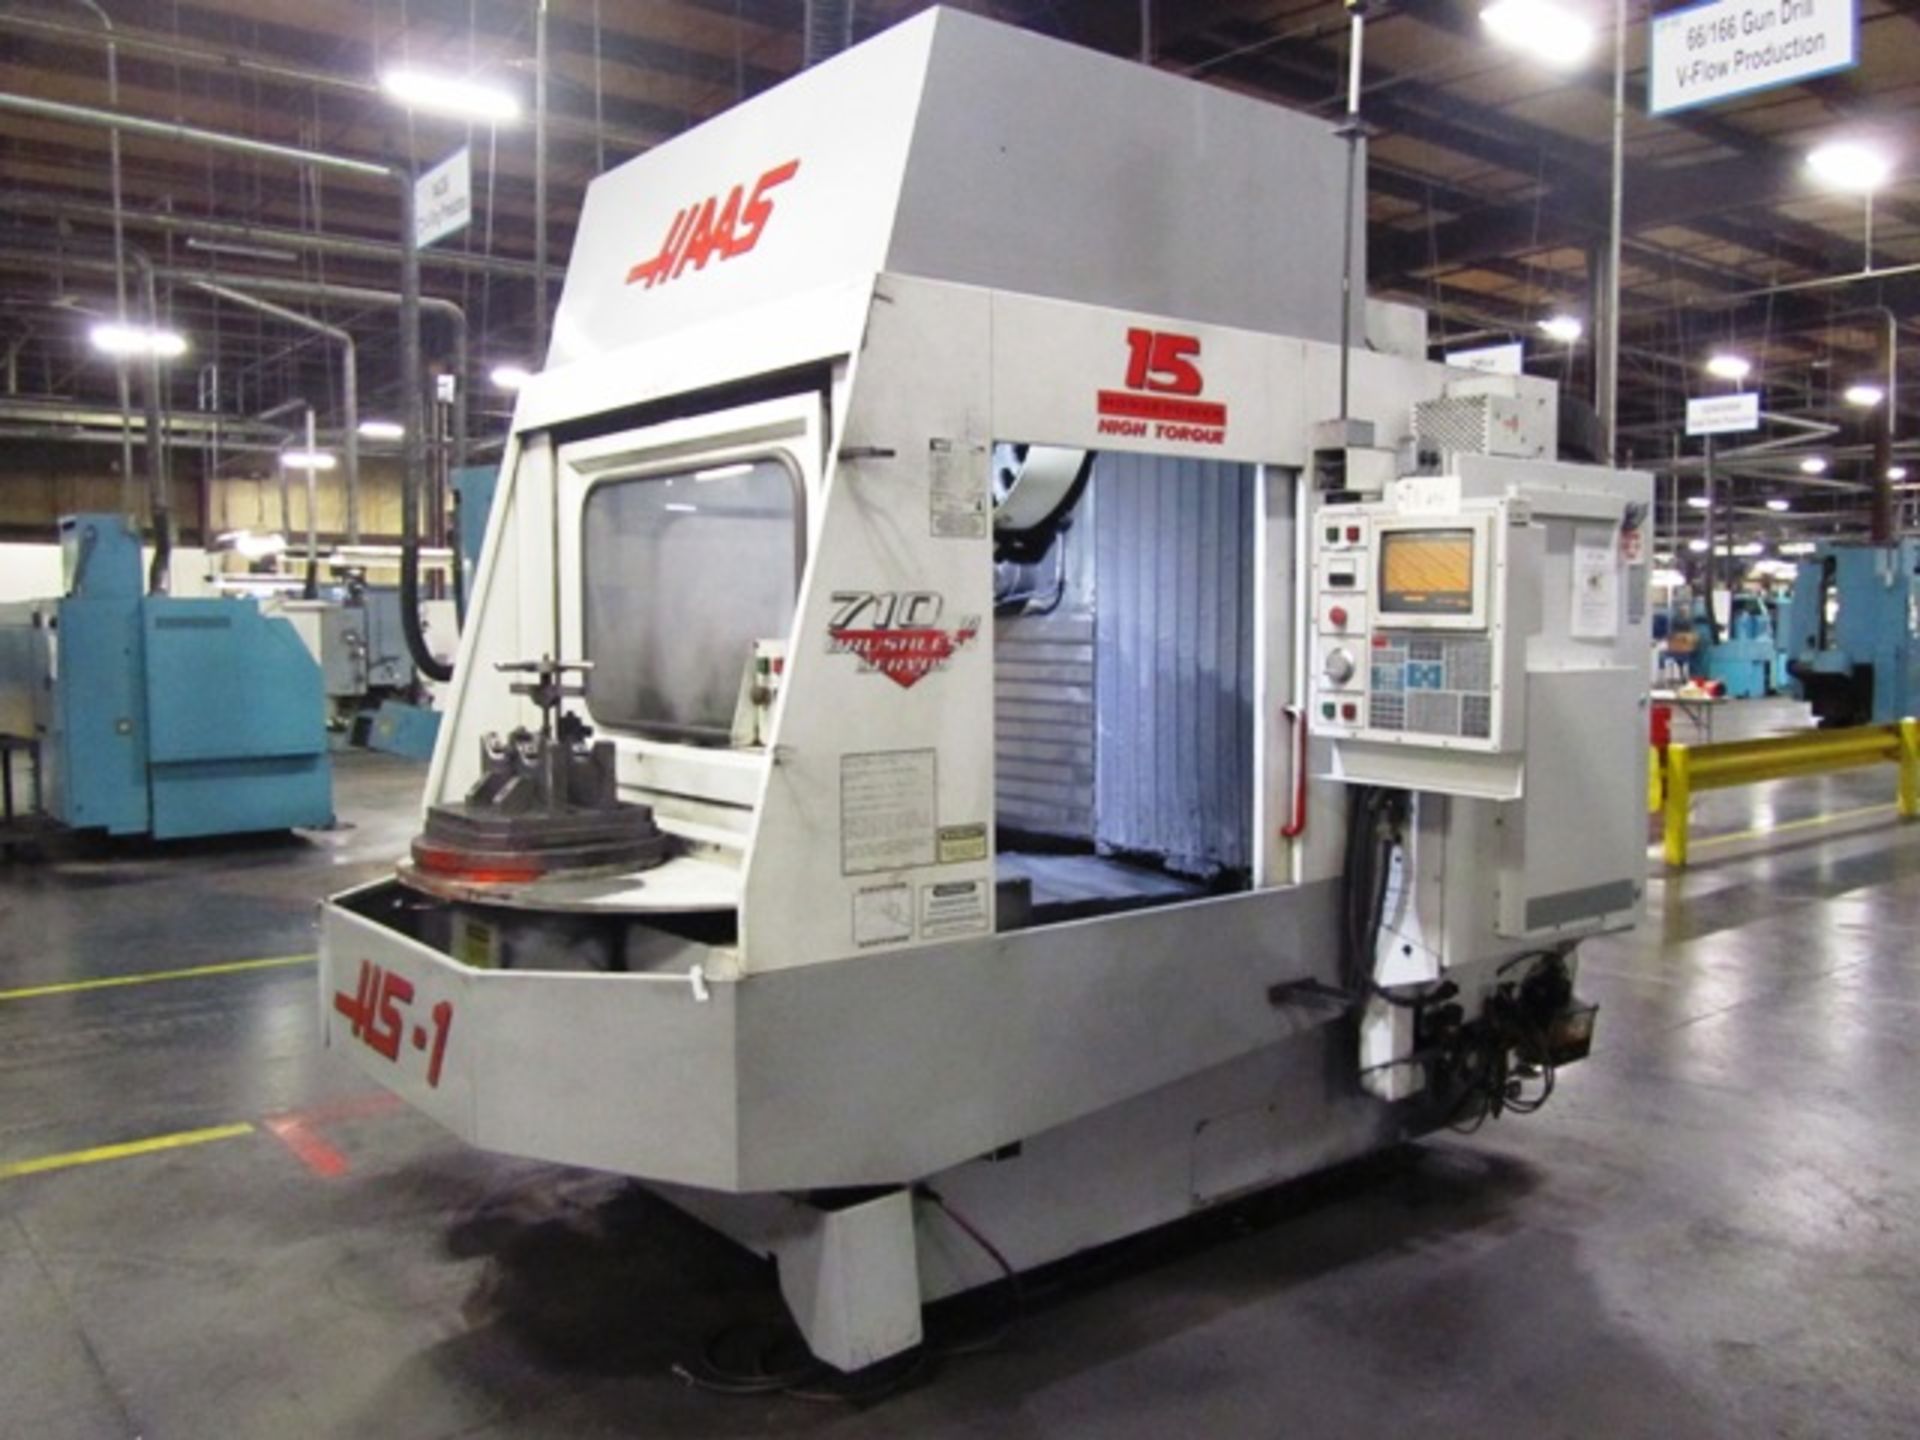 Haas HS-1 4-Axis CNC Horizontal Machining Center with (2) 16'' Pallets, #40 Taper Spindle, 24'' X-